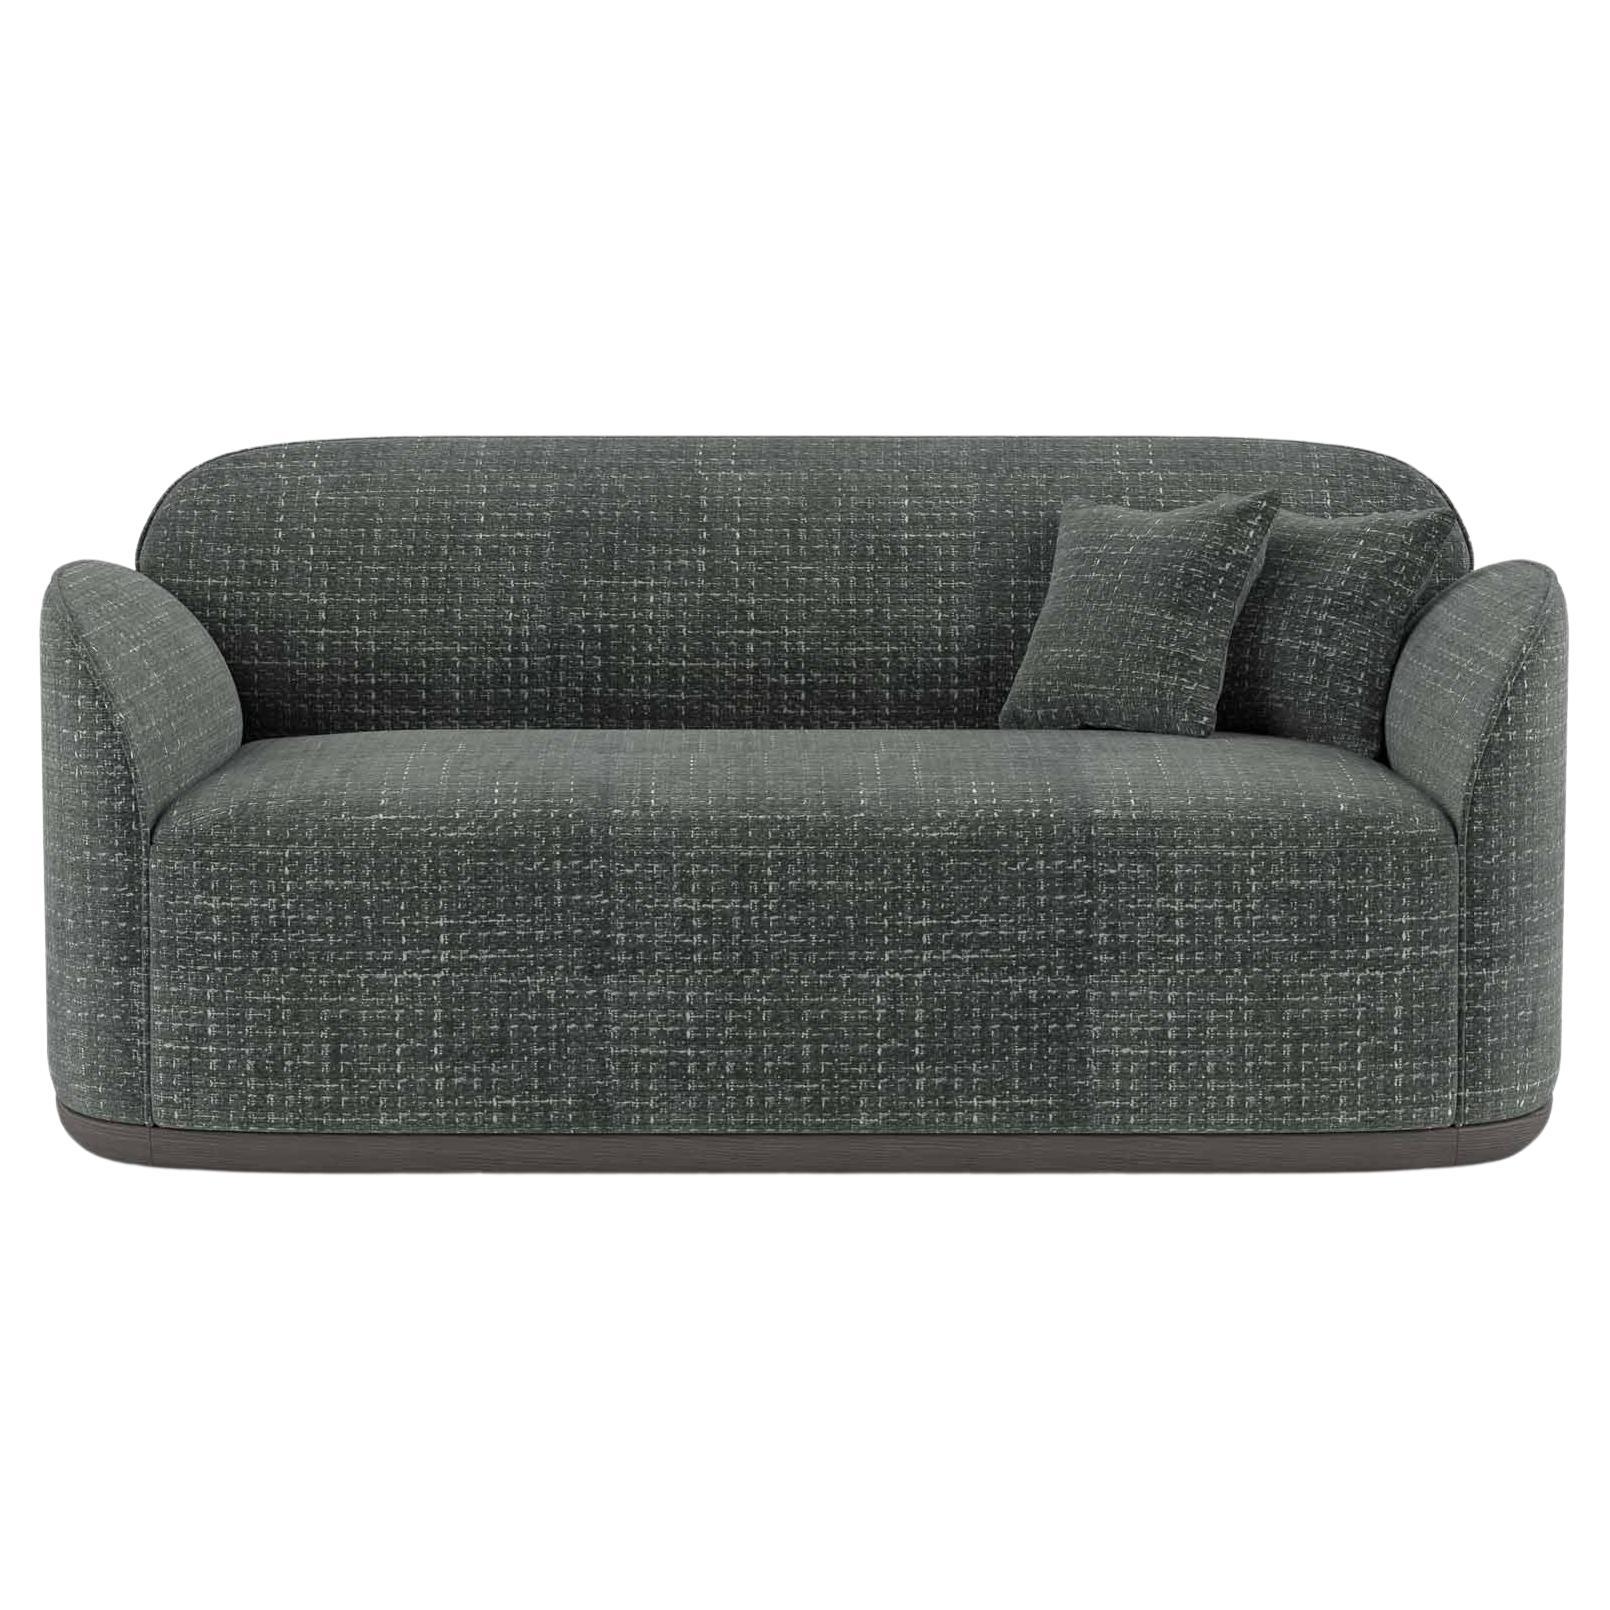 Unio Loveseat Upholstered with the Chivasso Yang Fabric by Poiat